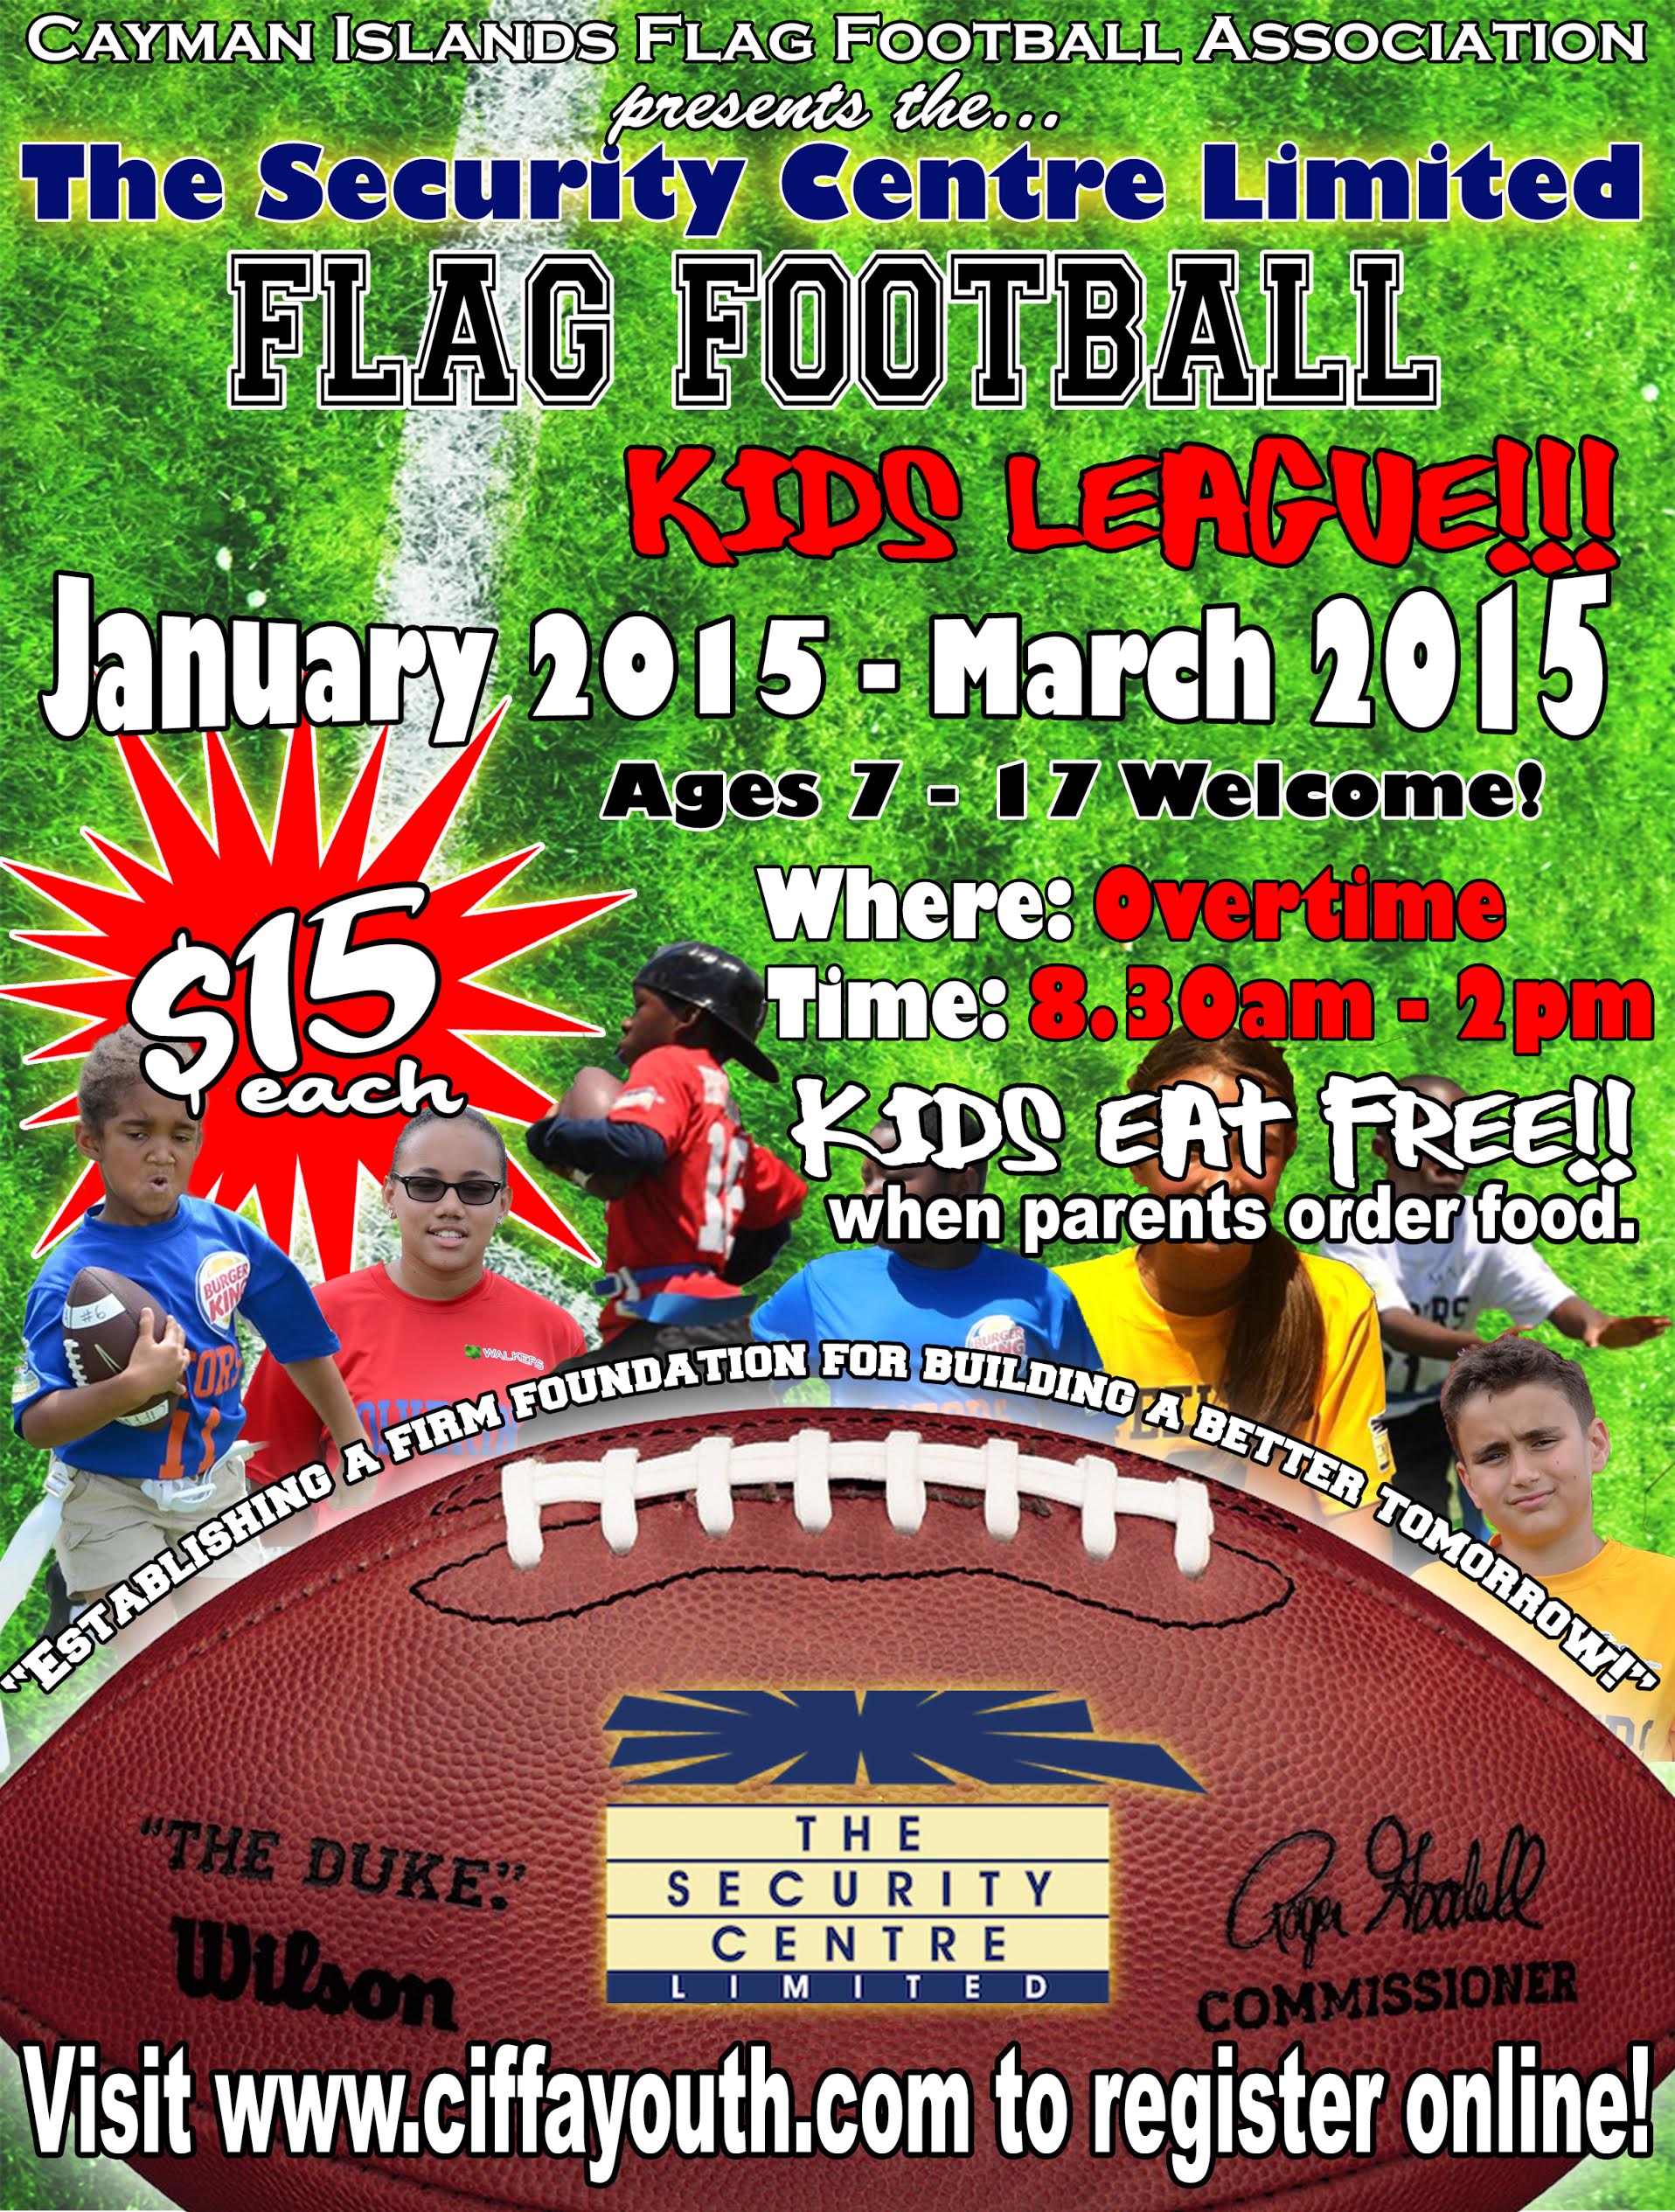 Young players wanted for flag football league